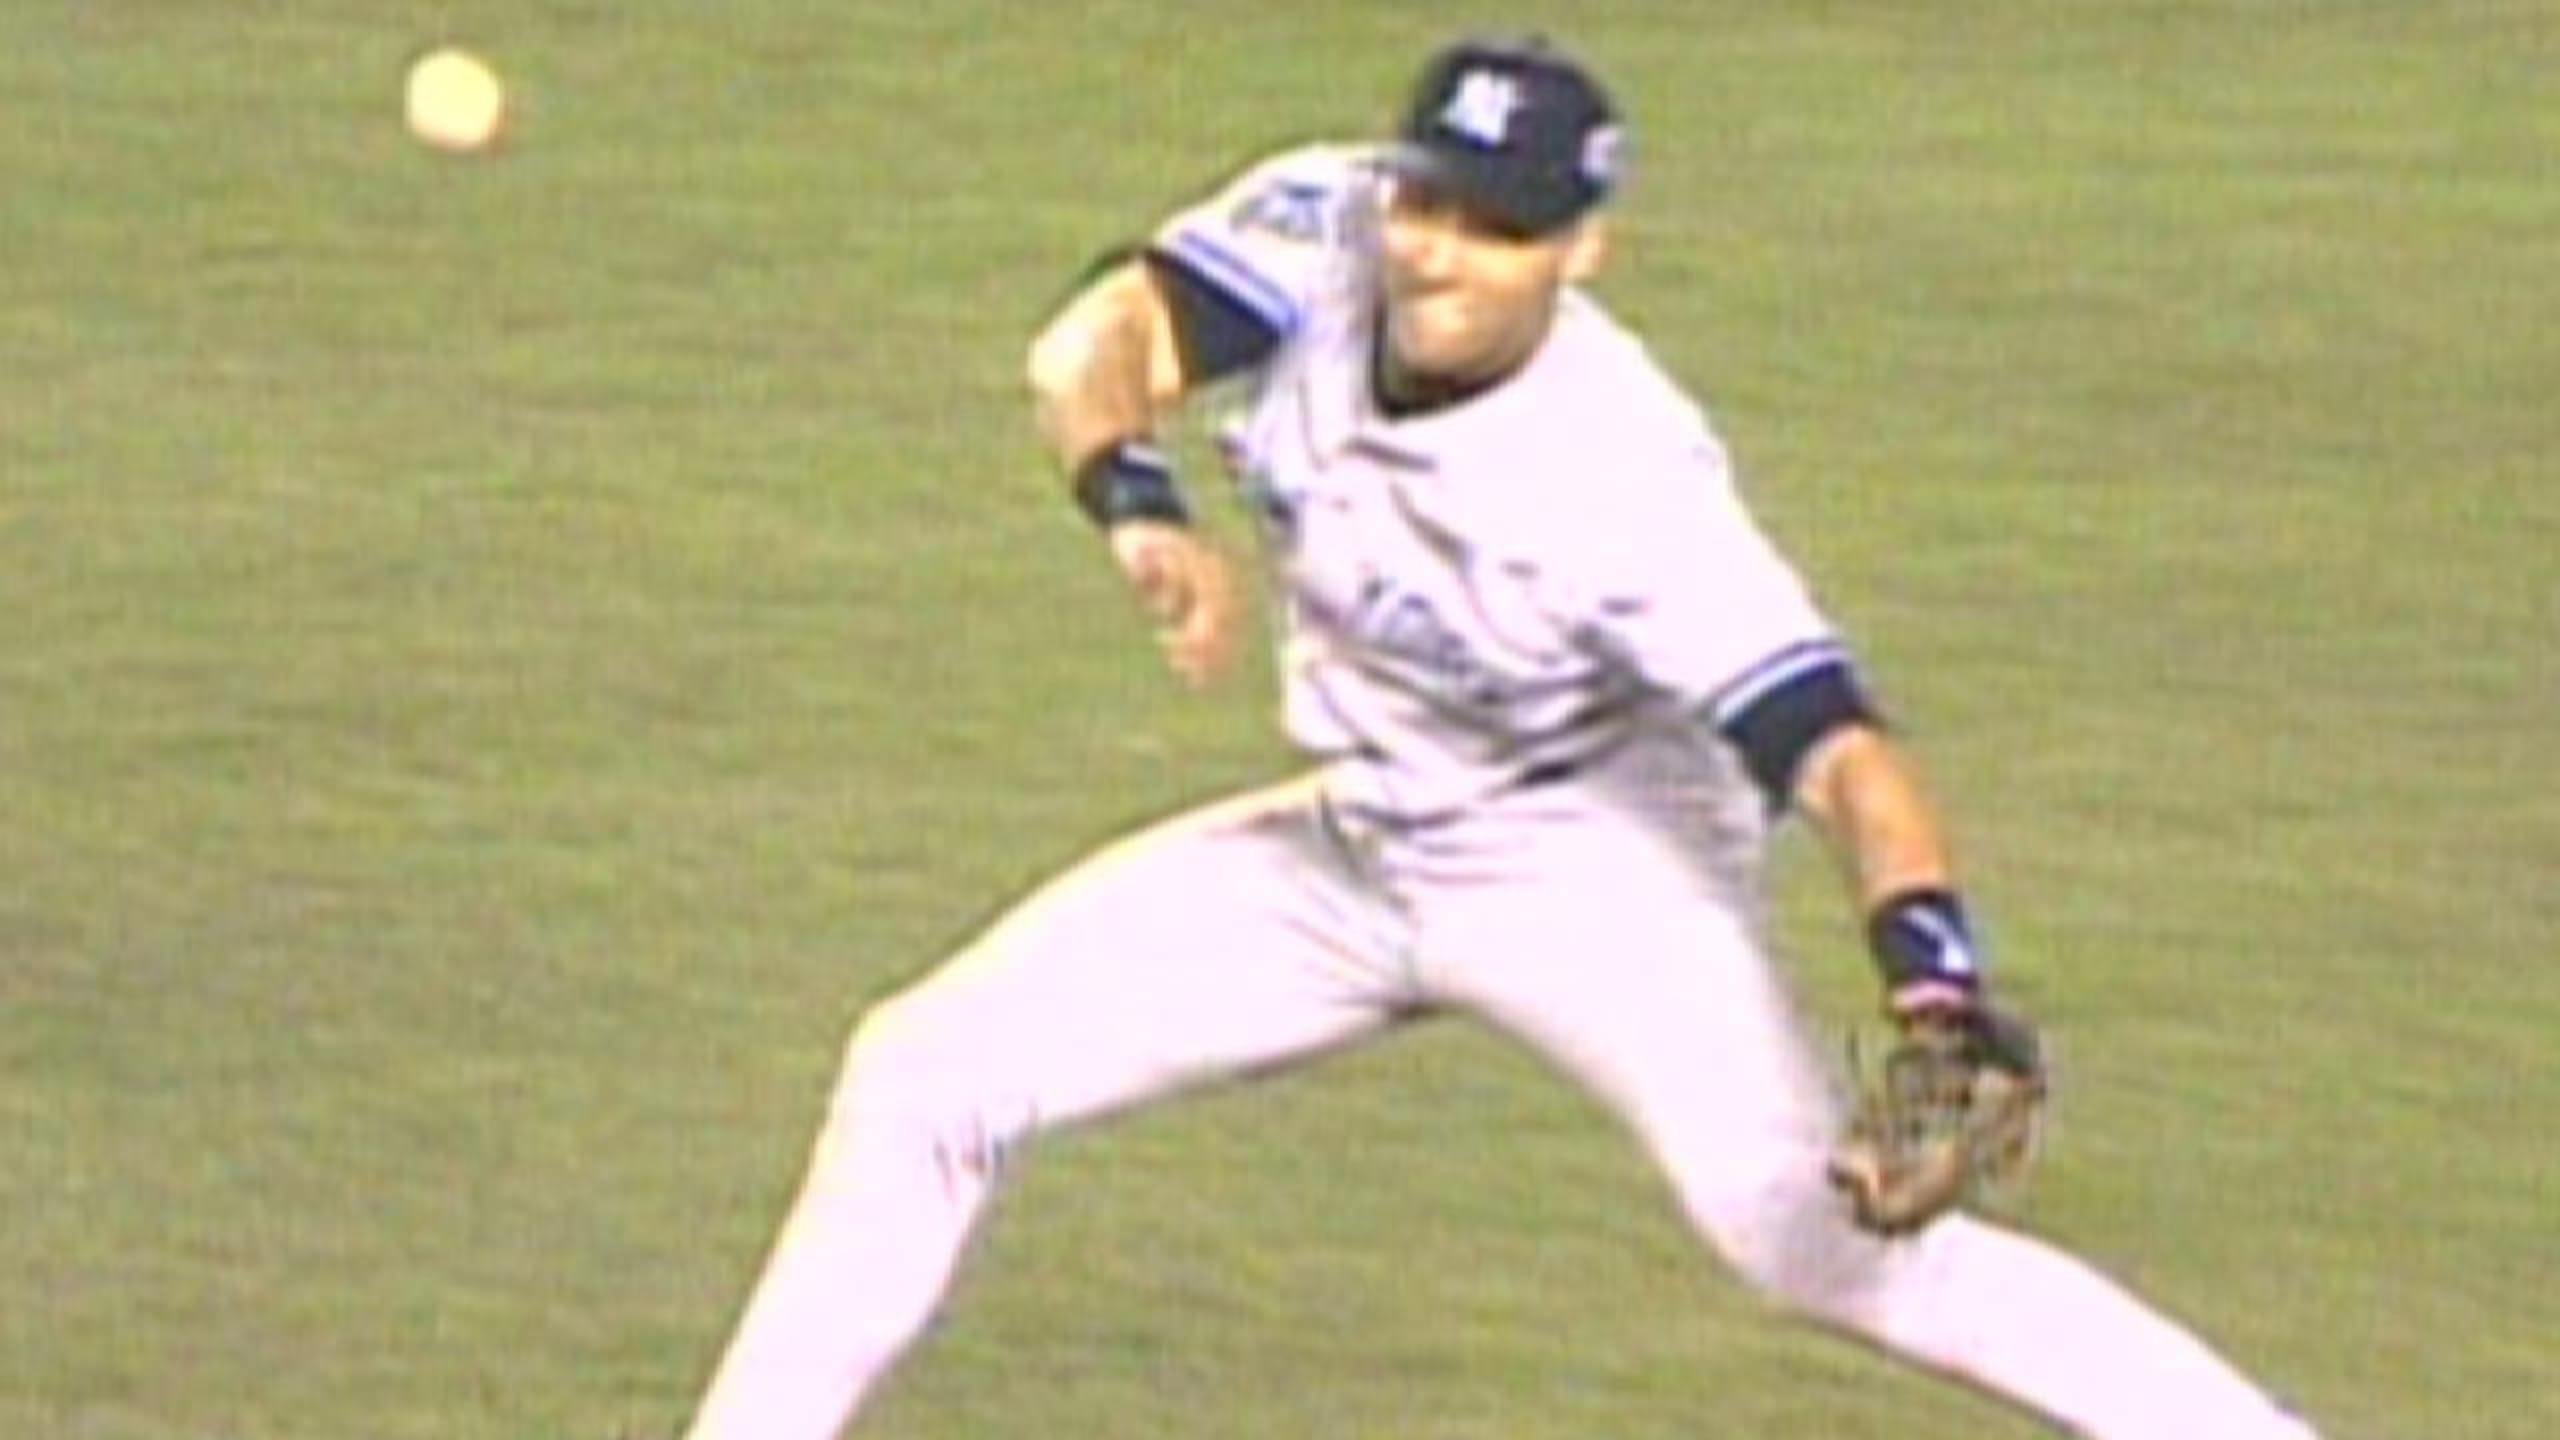 1998 Yankees Diary: Padres World Series preview - Pinstripe Alley